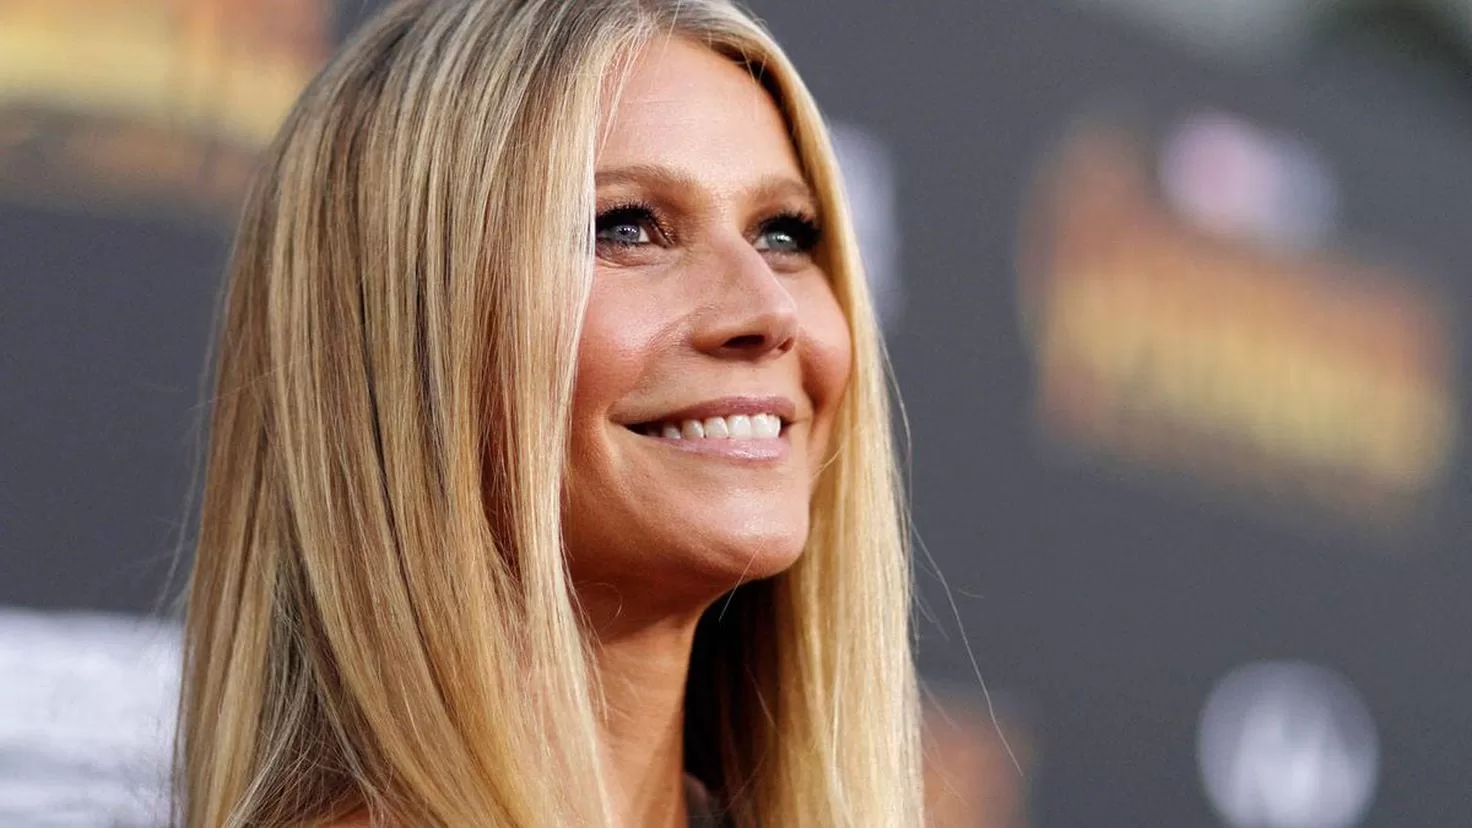 Gwyneth Paltrow's Christmas list: from a $15,000 sex toy to a board game
